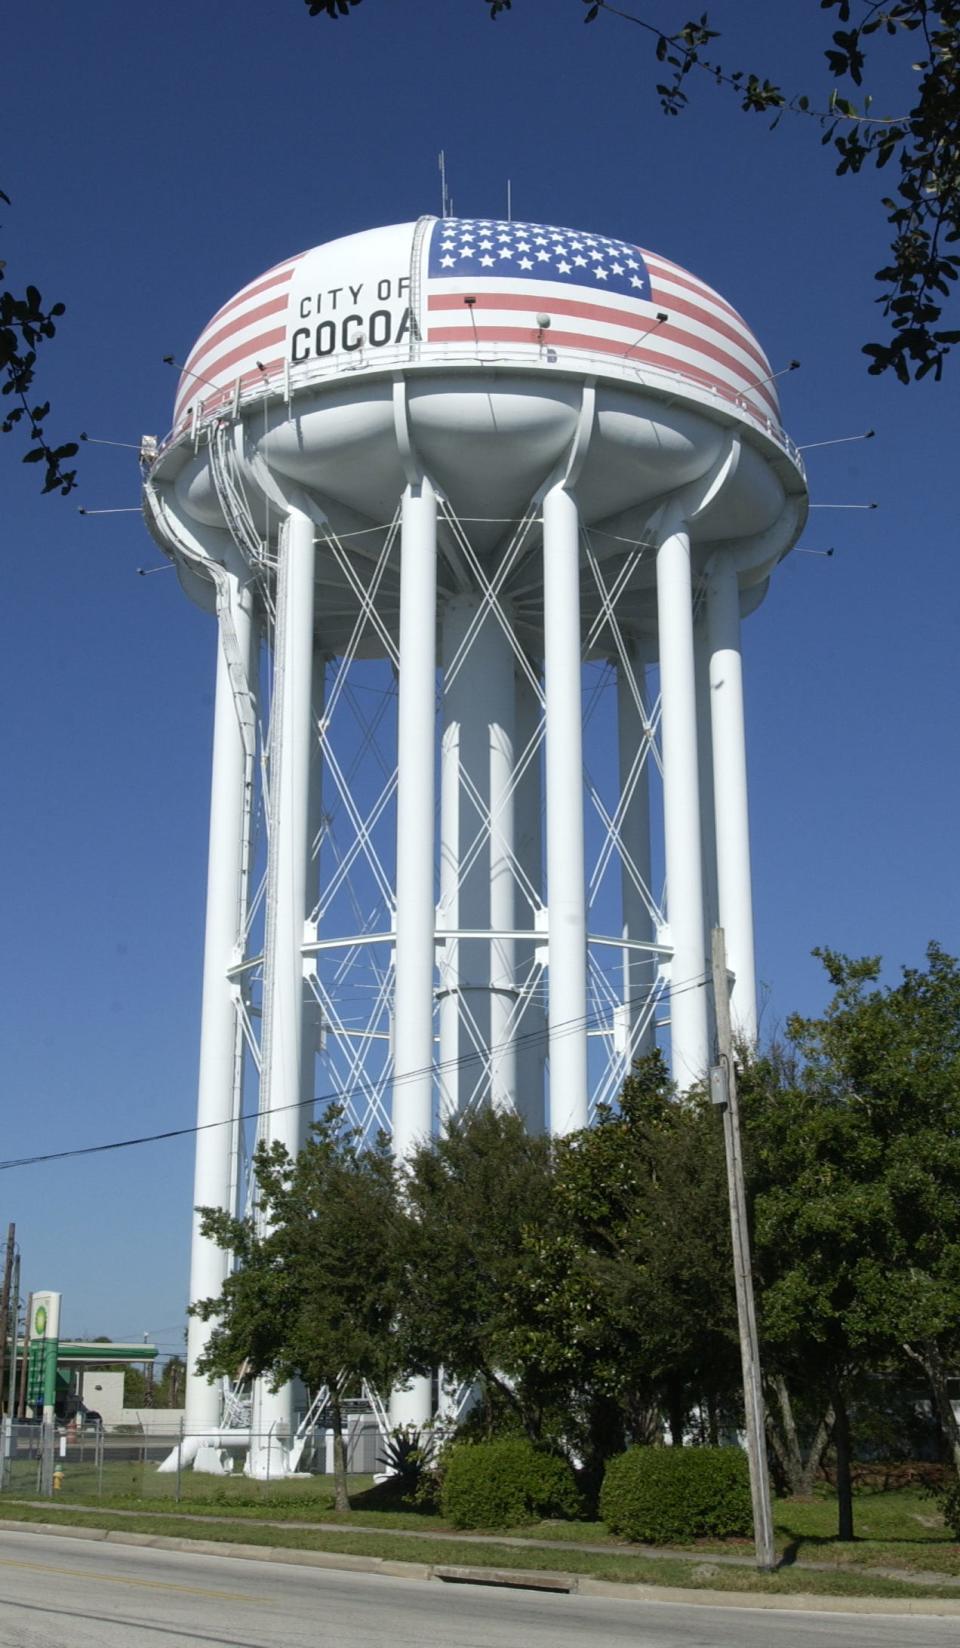 The Cocoa water tower's stars and stripes were originally painted as a gift to the city from a Greek immigrant.